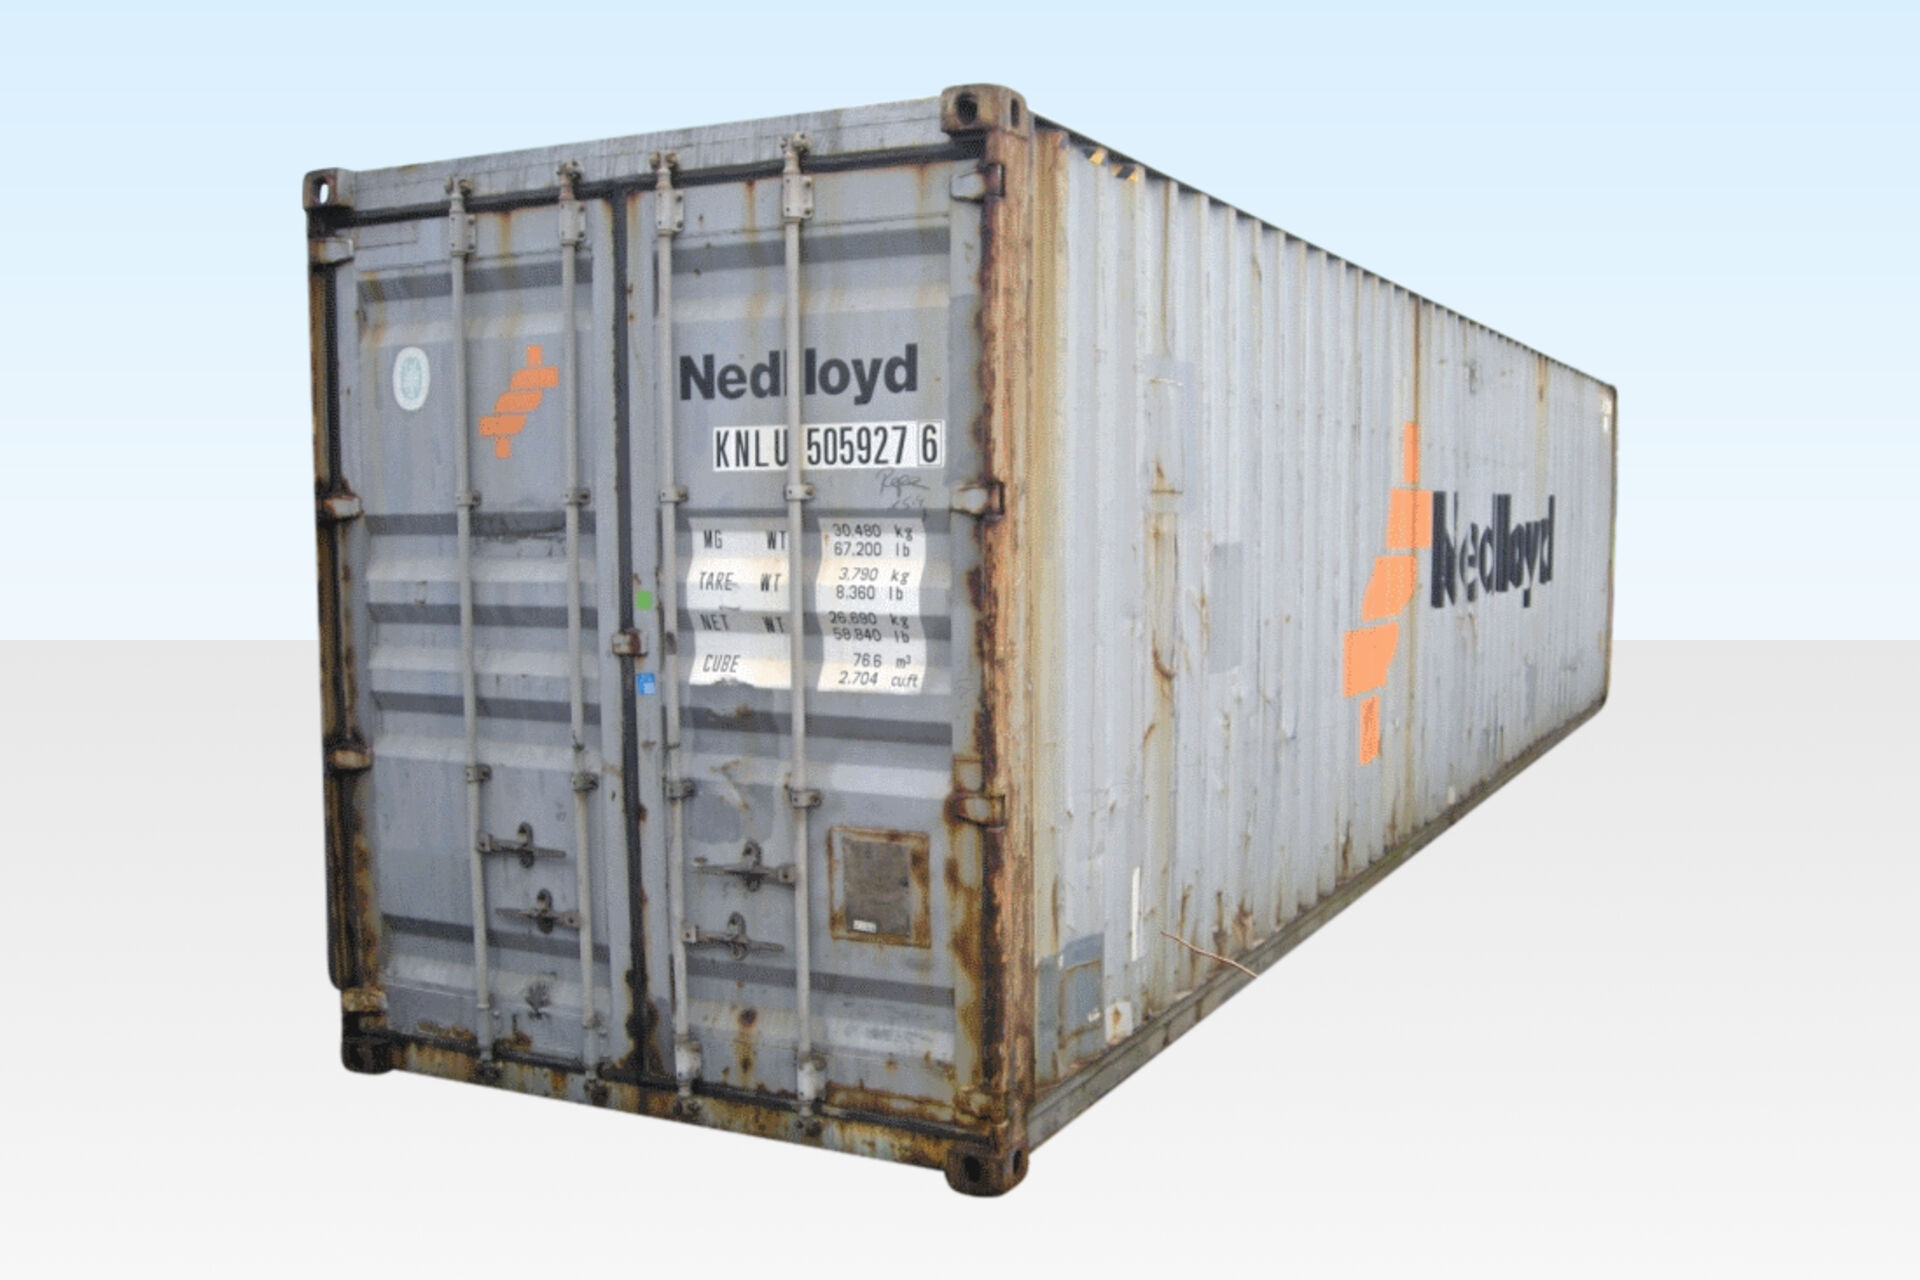 BUY 40FT CHEAP USED SHIPPING CONTAINER AT WWW.HELLOCONTAINERS.COM